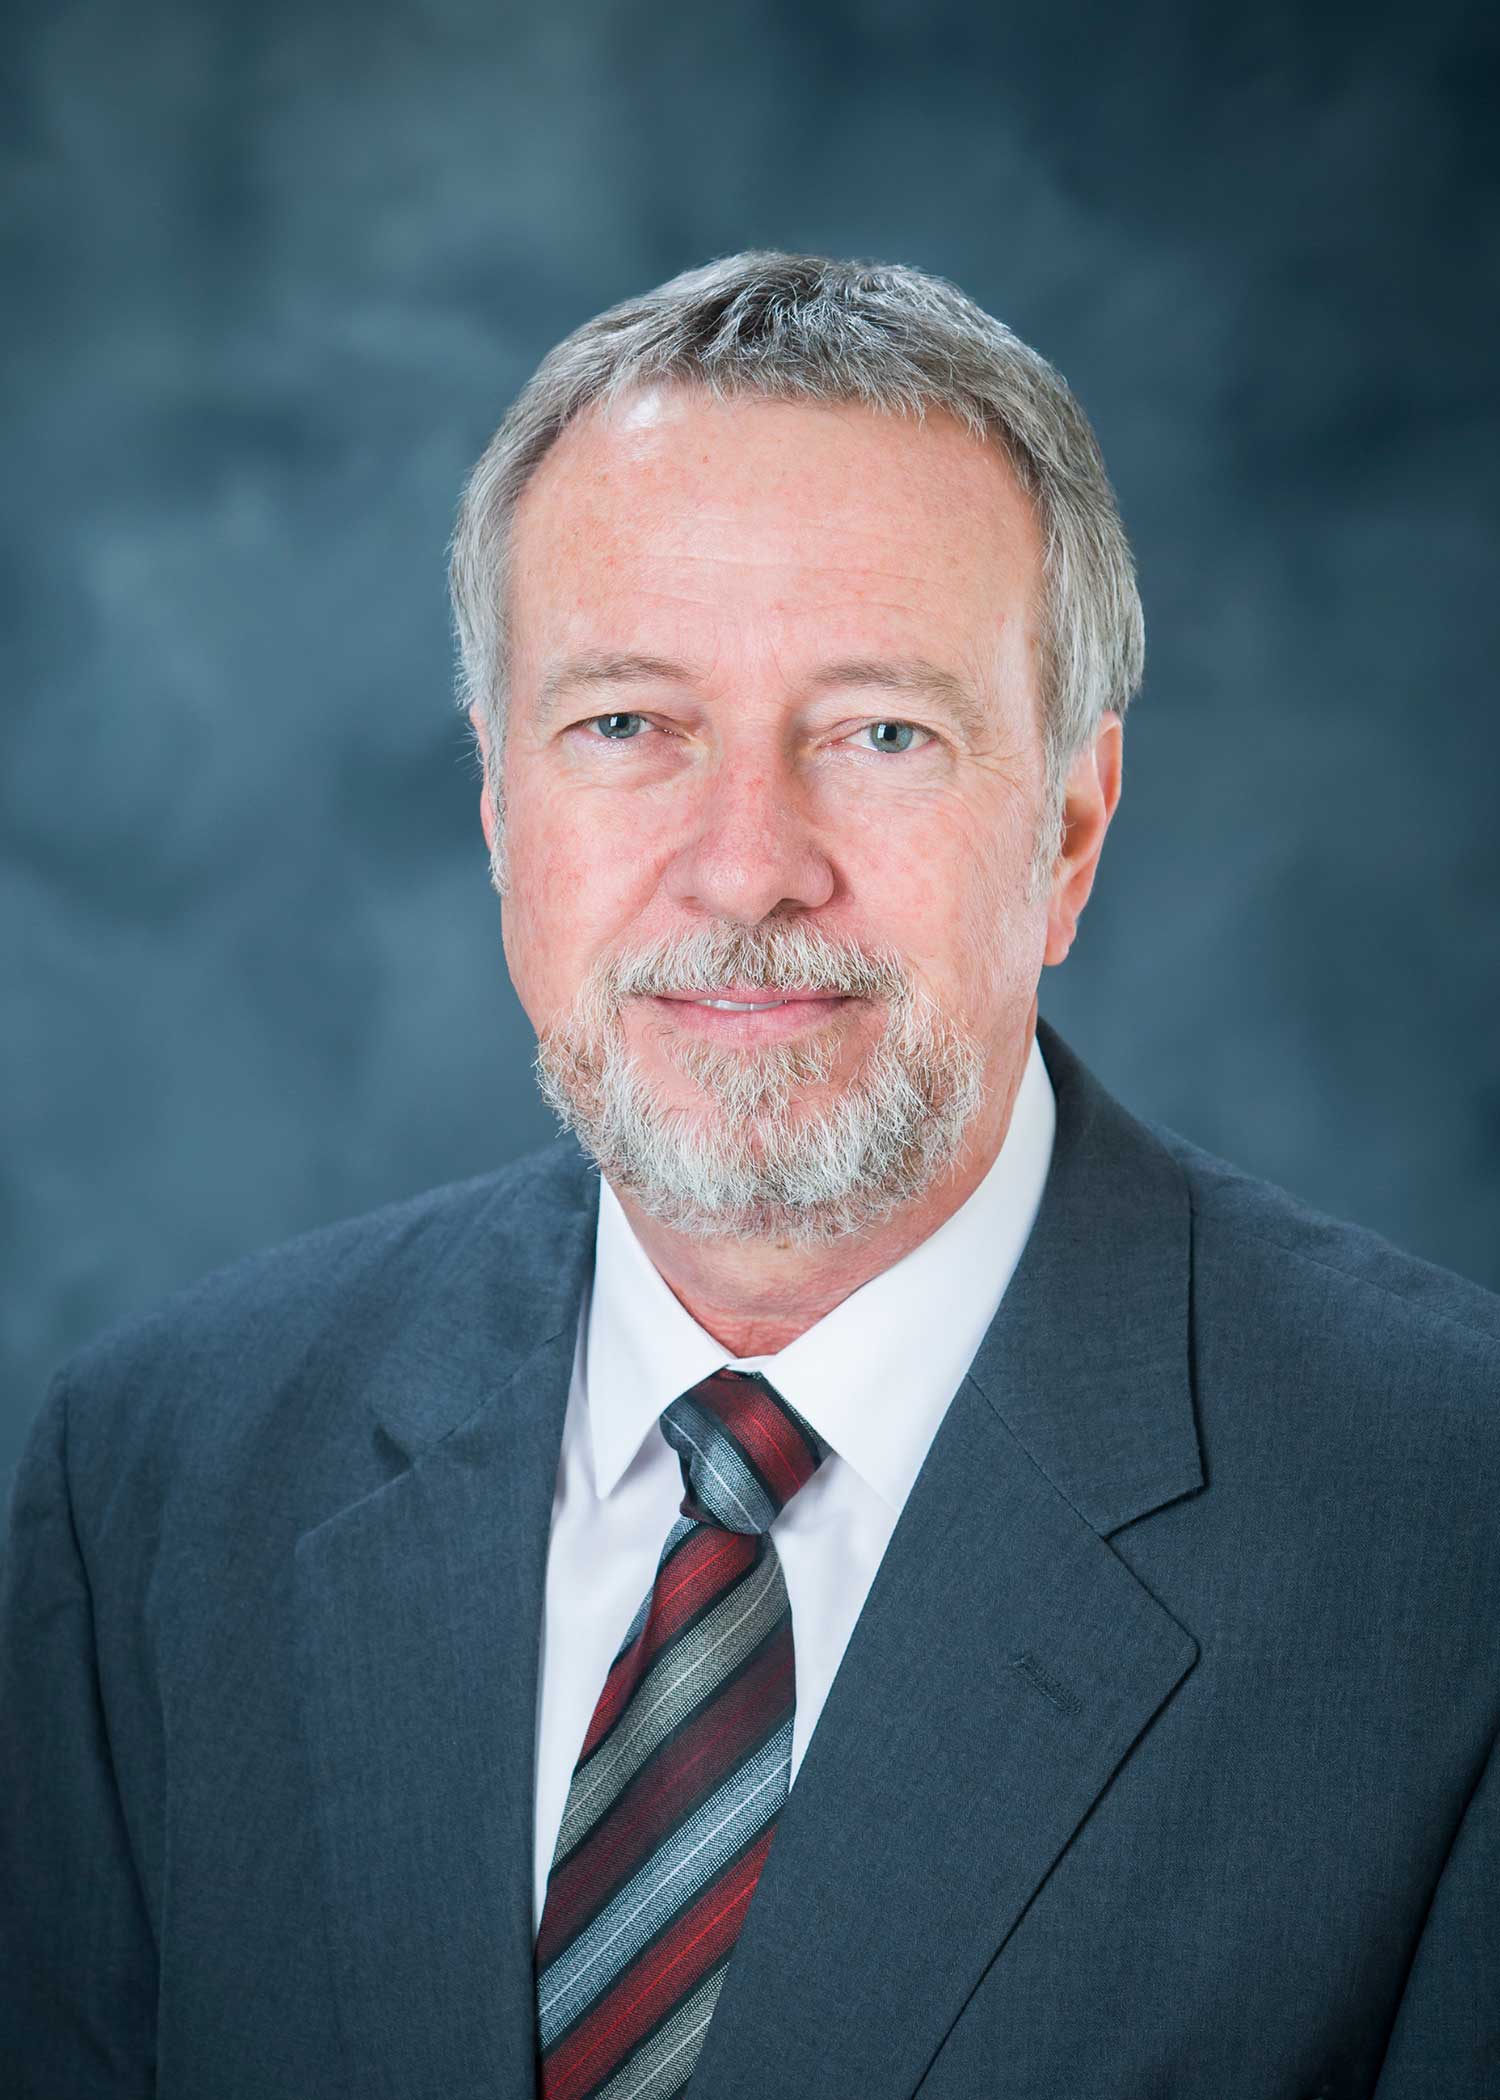 Professional photo of Darrel Schmitz, wearing a gray suit and striped tie against a blue background